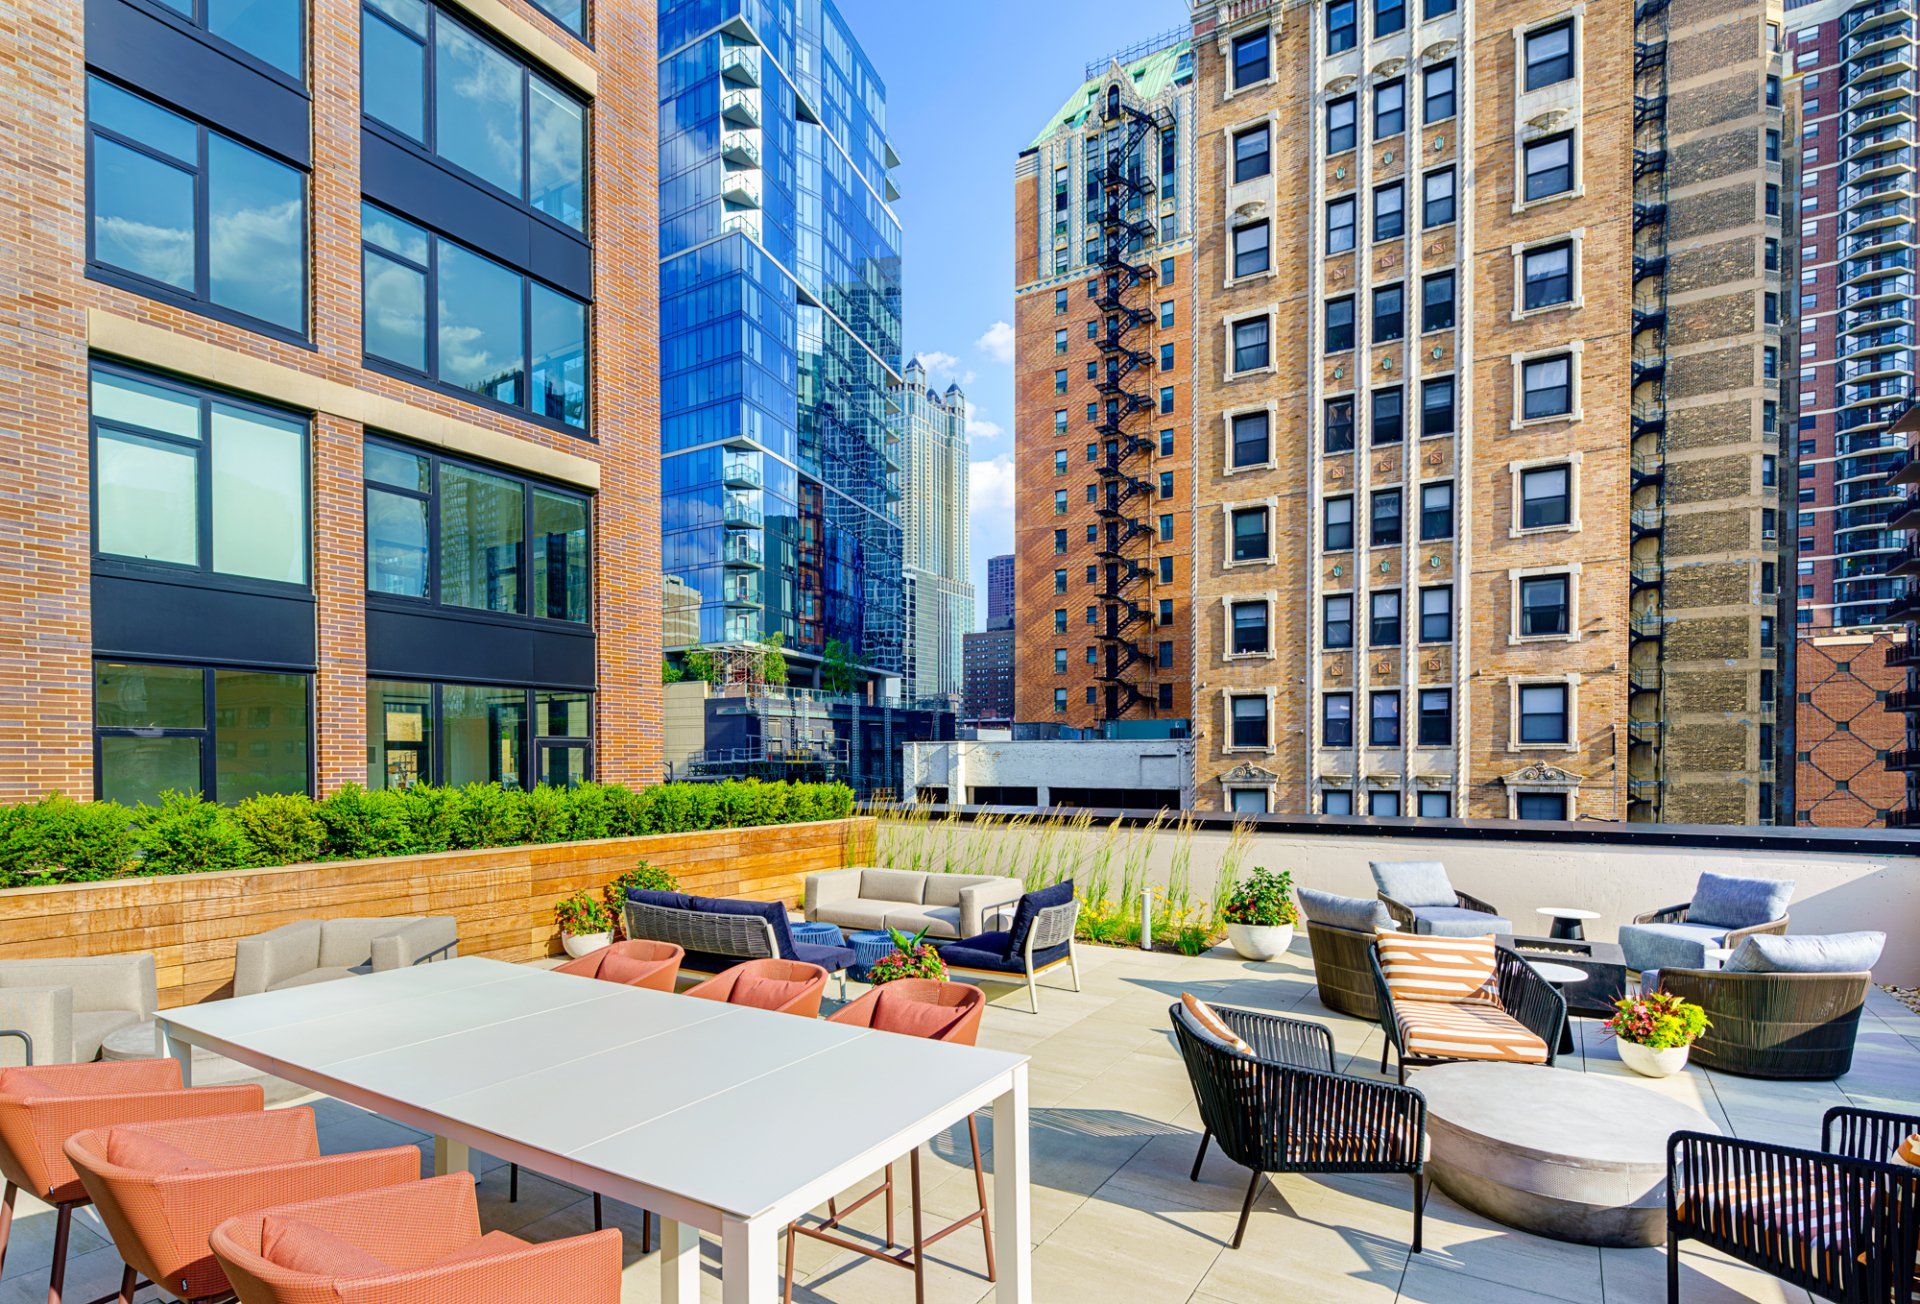 Apartment community outdoor lounge with a lot of seating areas at Gild.